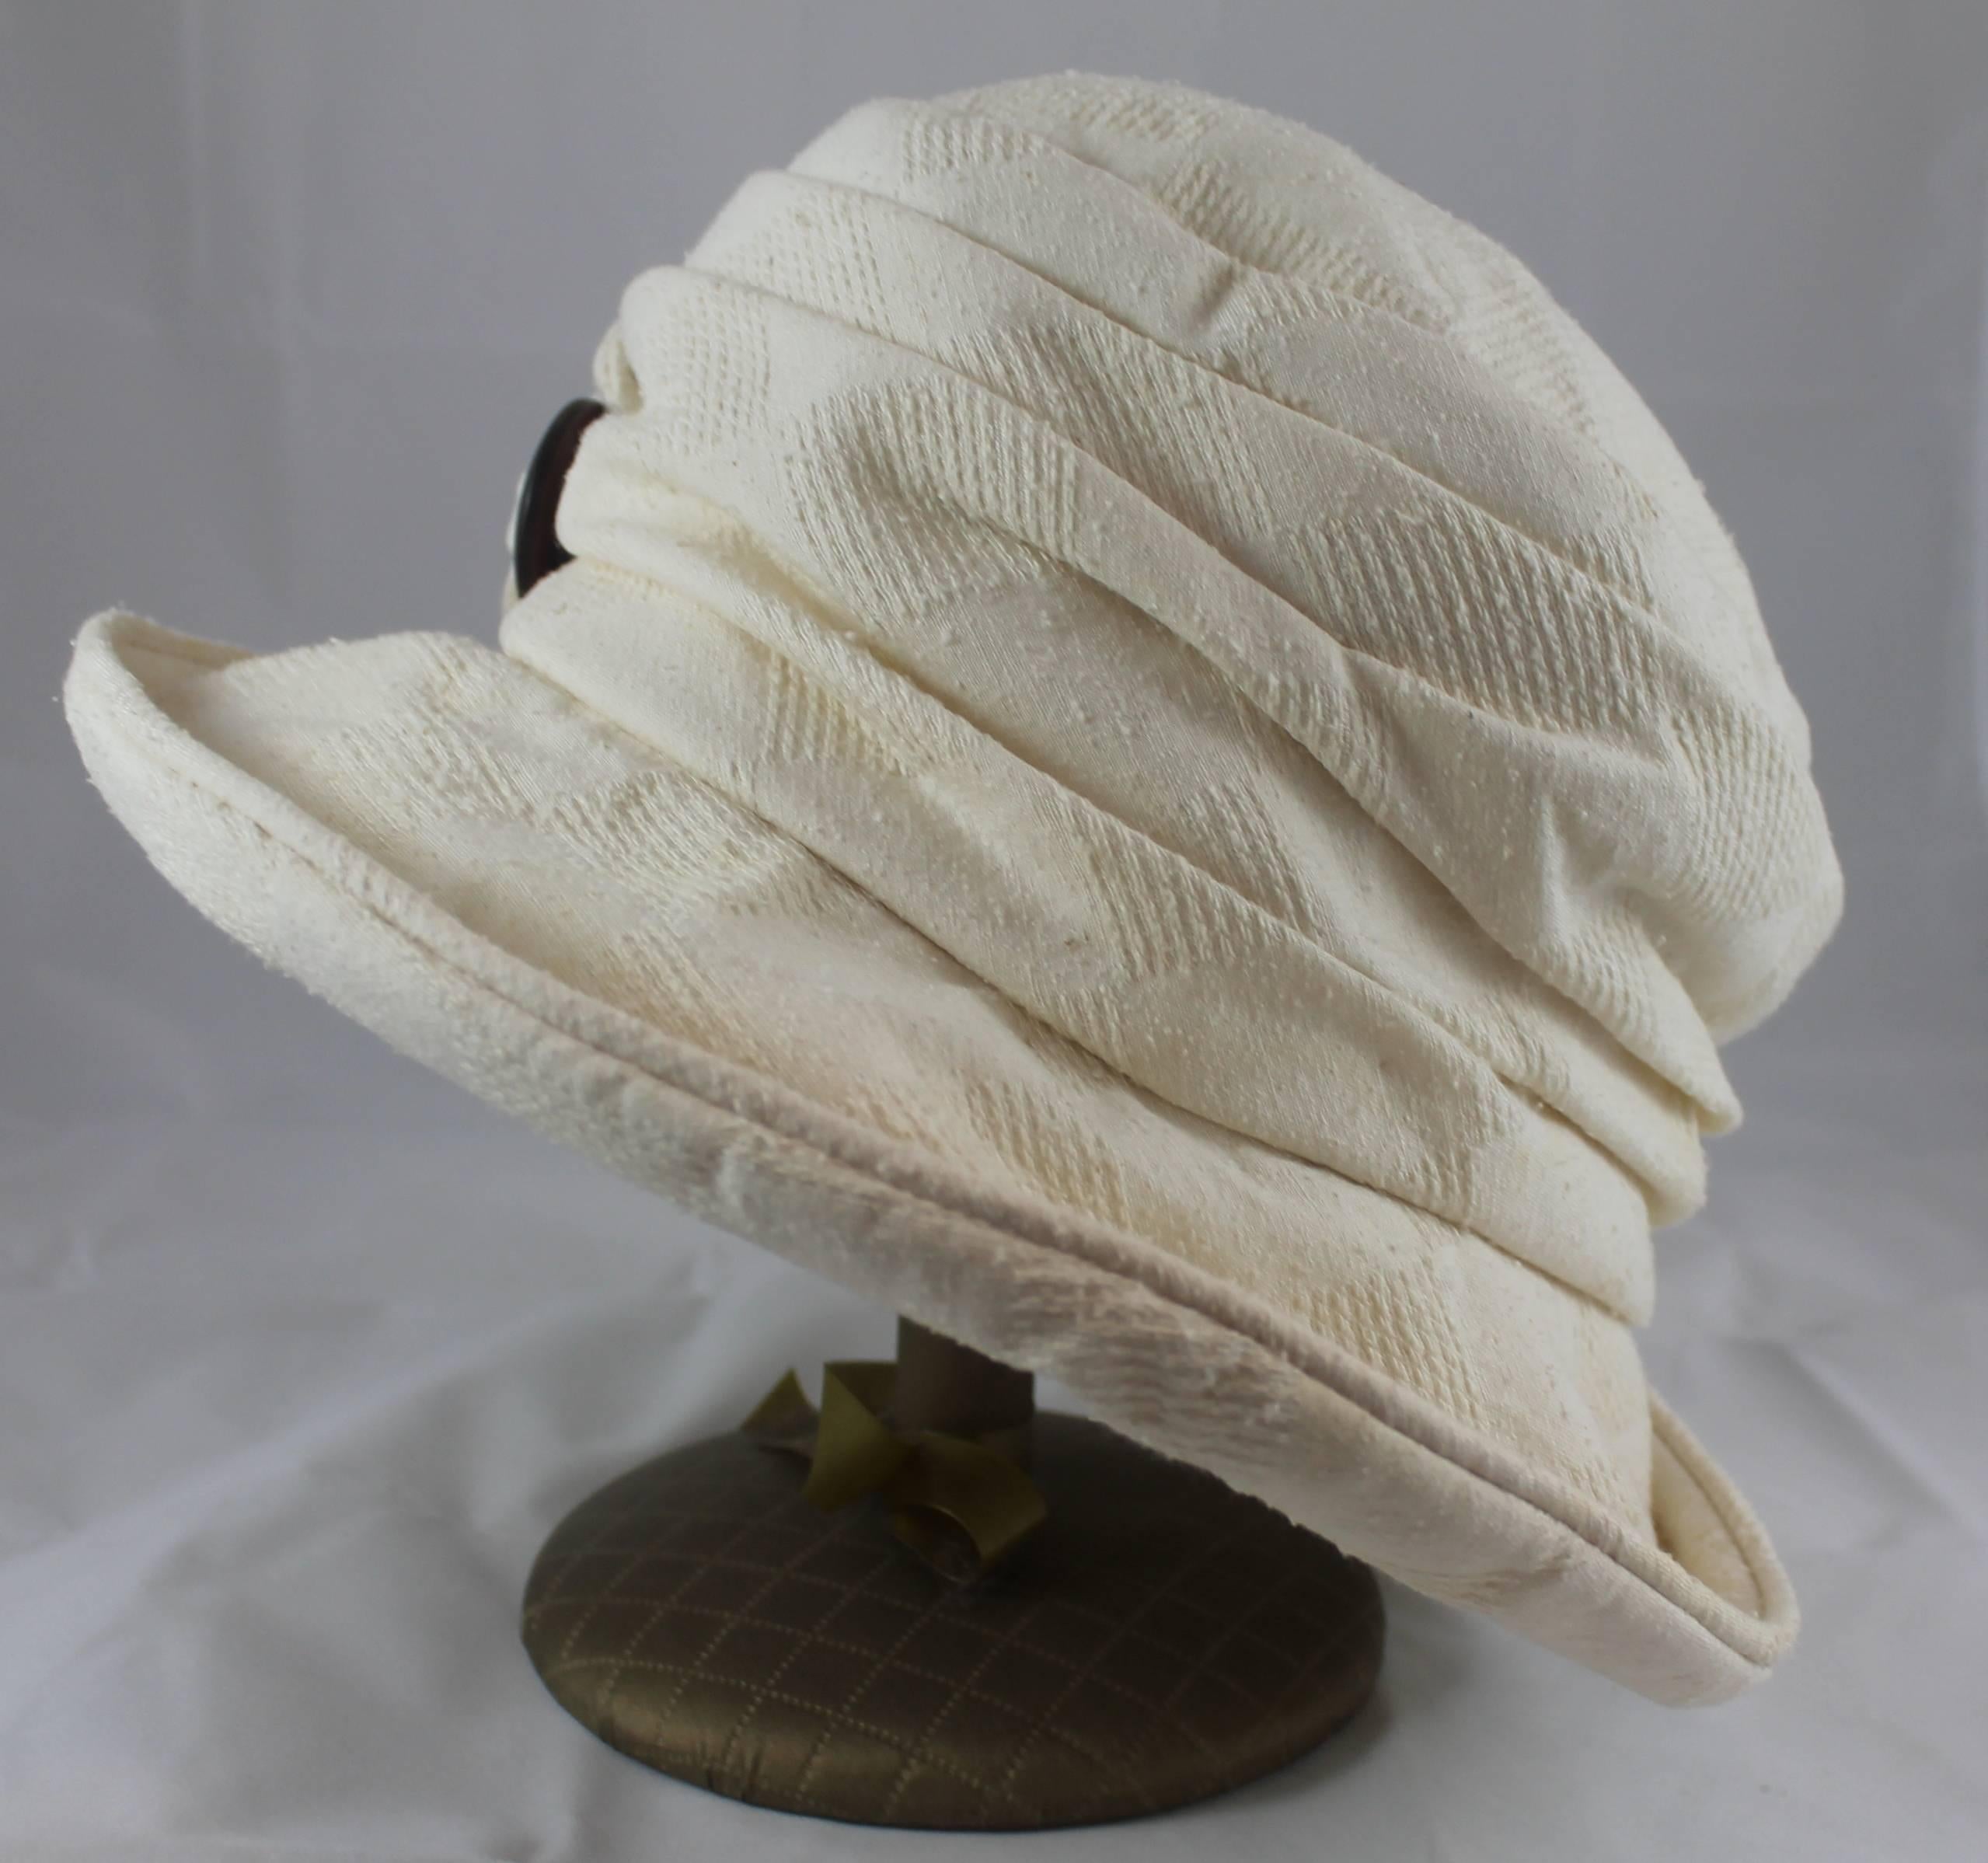 Suzanne Couture Millinery Ivory Cloth Floppy Hat with a Wooden Button. This floppy hat has 